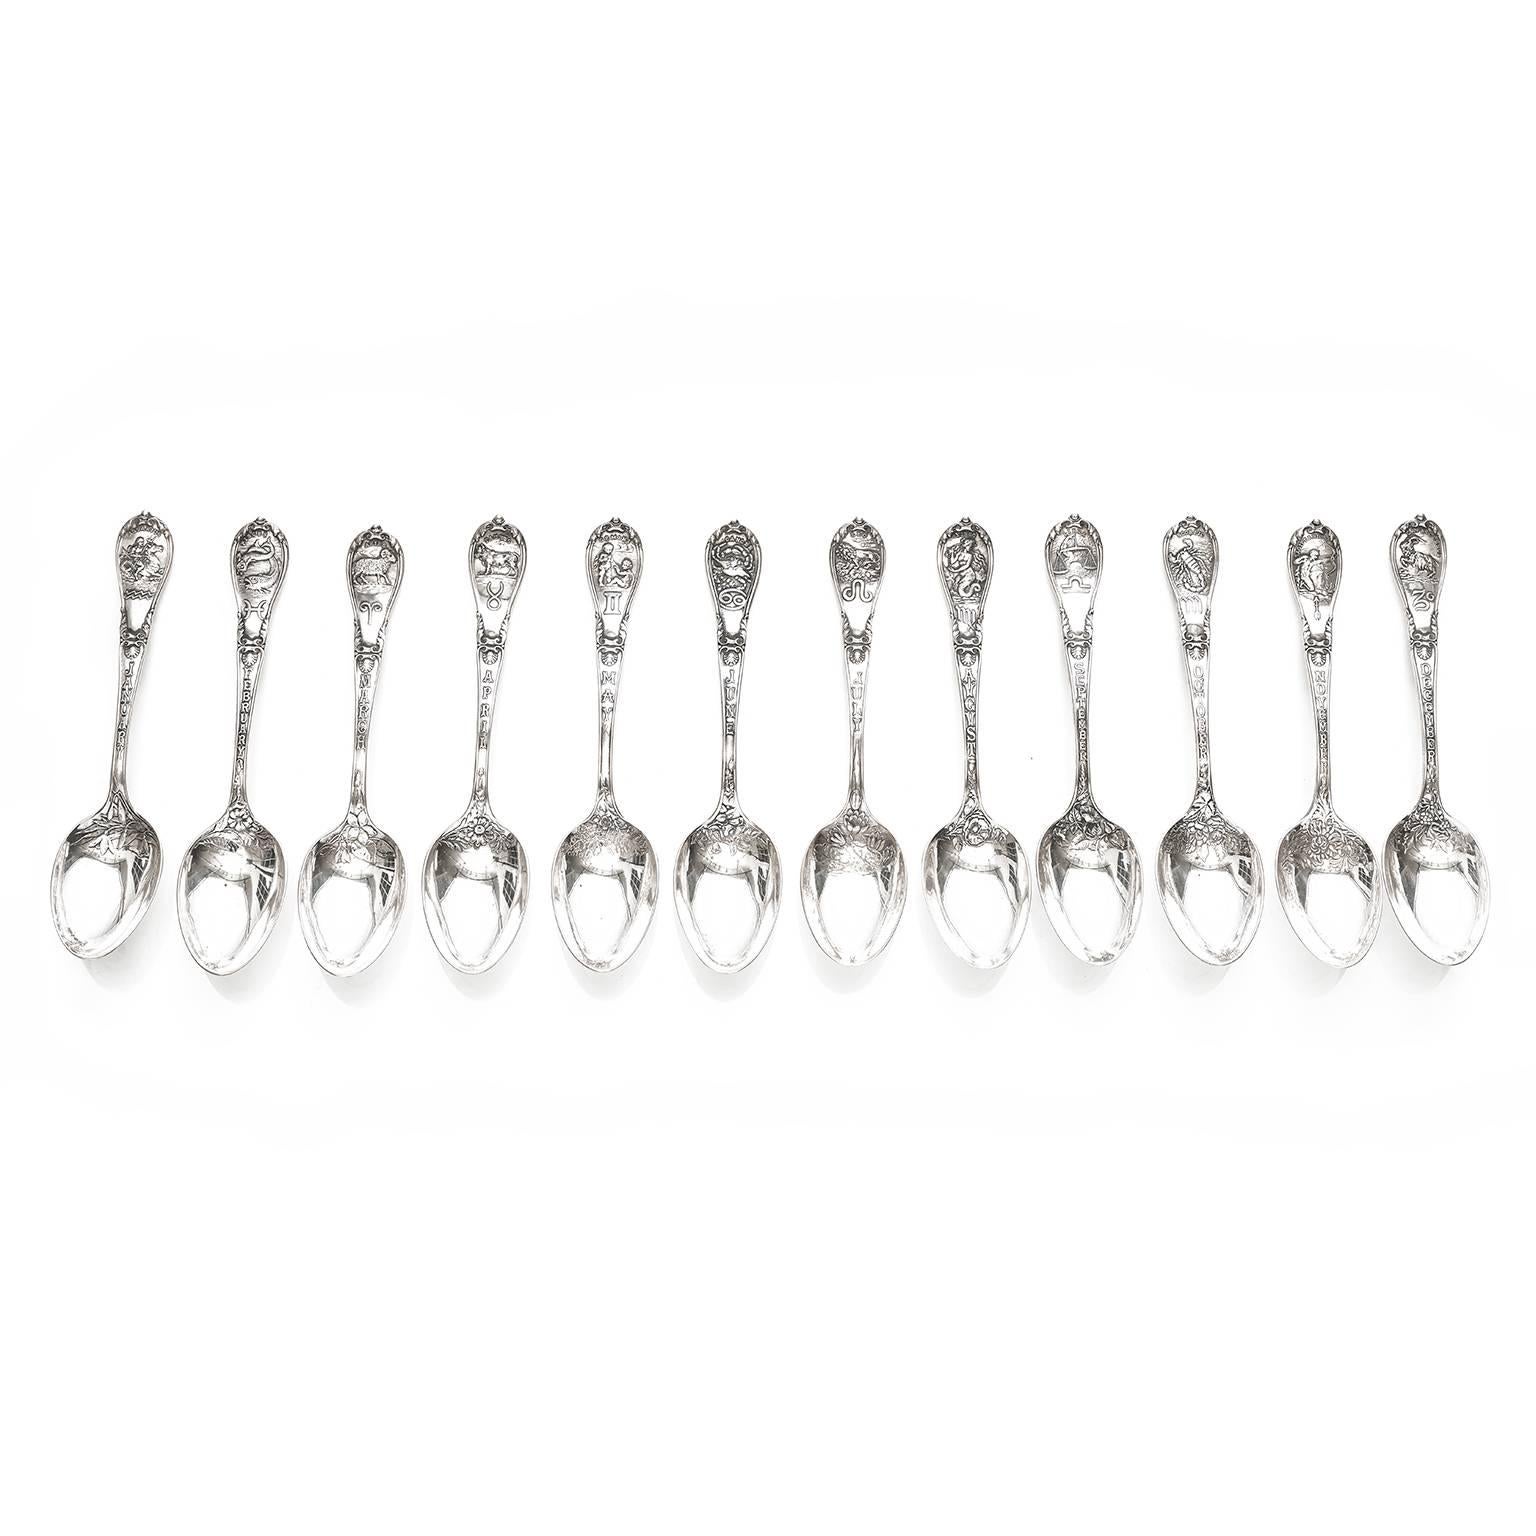 Sterling by the Gorham Silver Co. This fabulous set of 12 tea spoons from the turn of the century imaginatively features a different month and zodiac symbol adorning each spoon. The naturalistic depictions of each astrological sign are finely